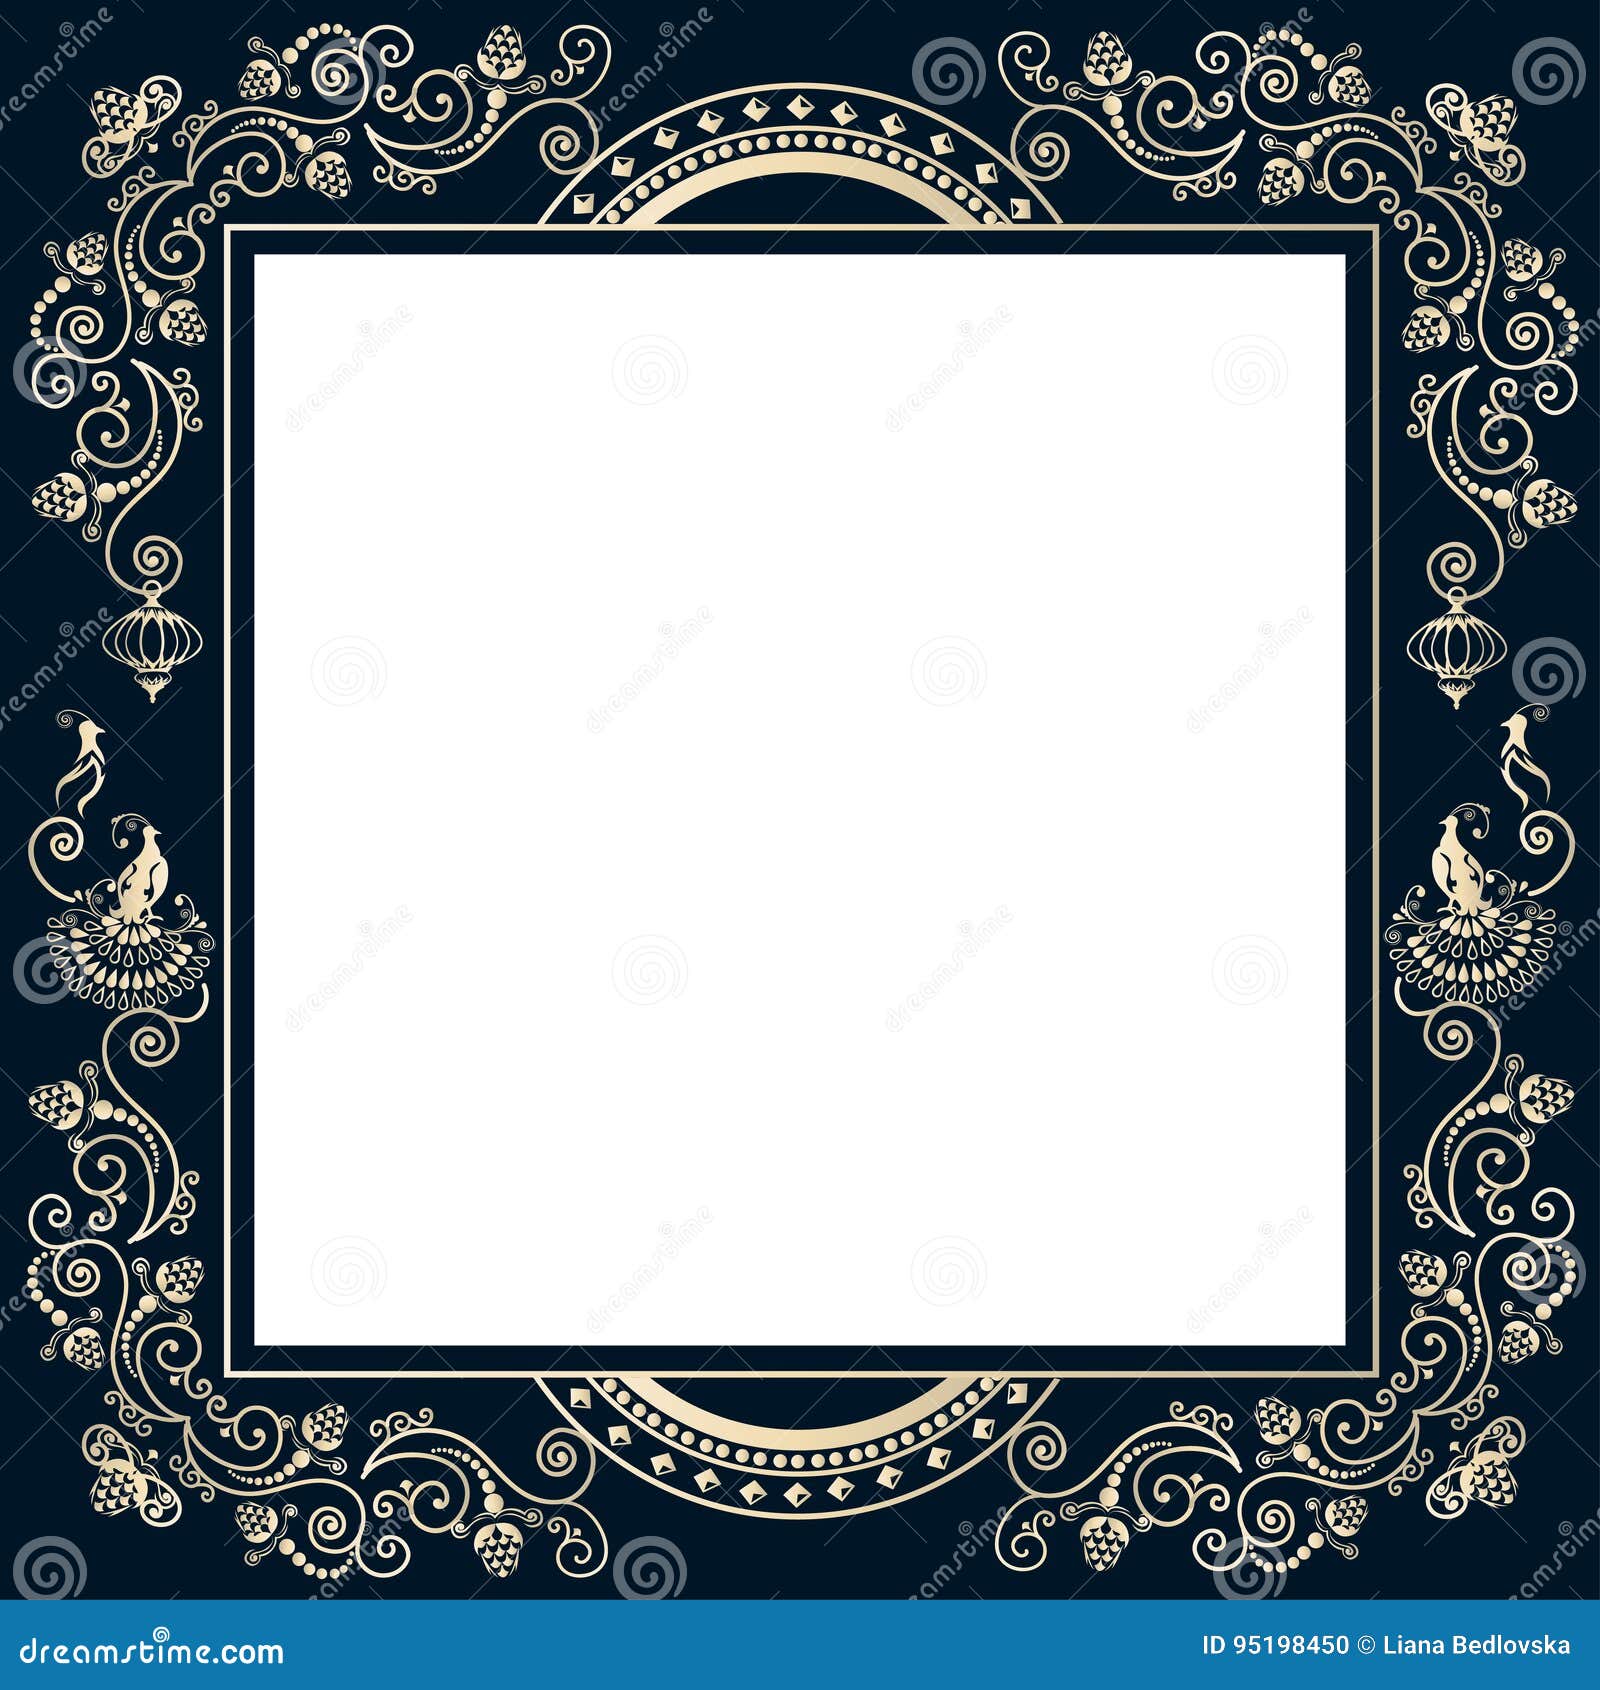 Vintage frame with birds stock vector. Illustration of clock - 95198450